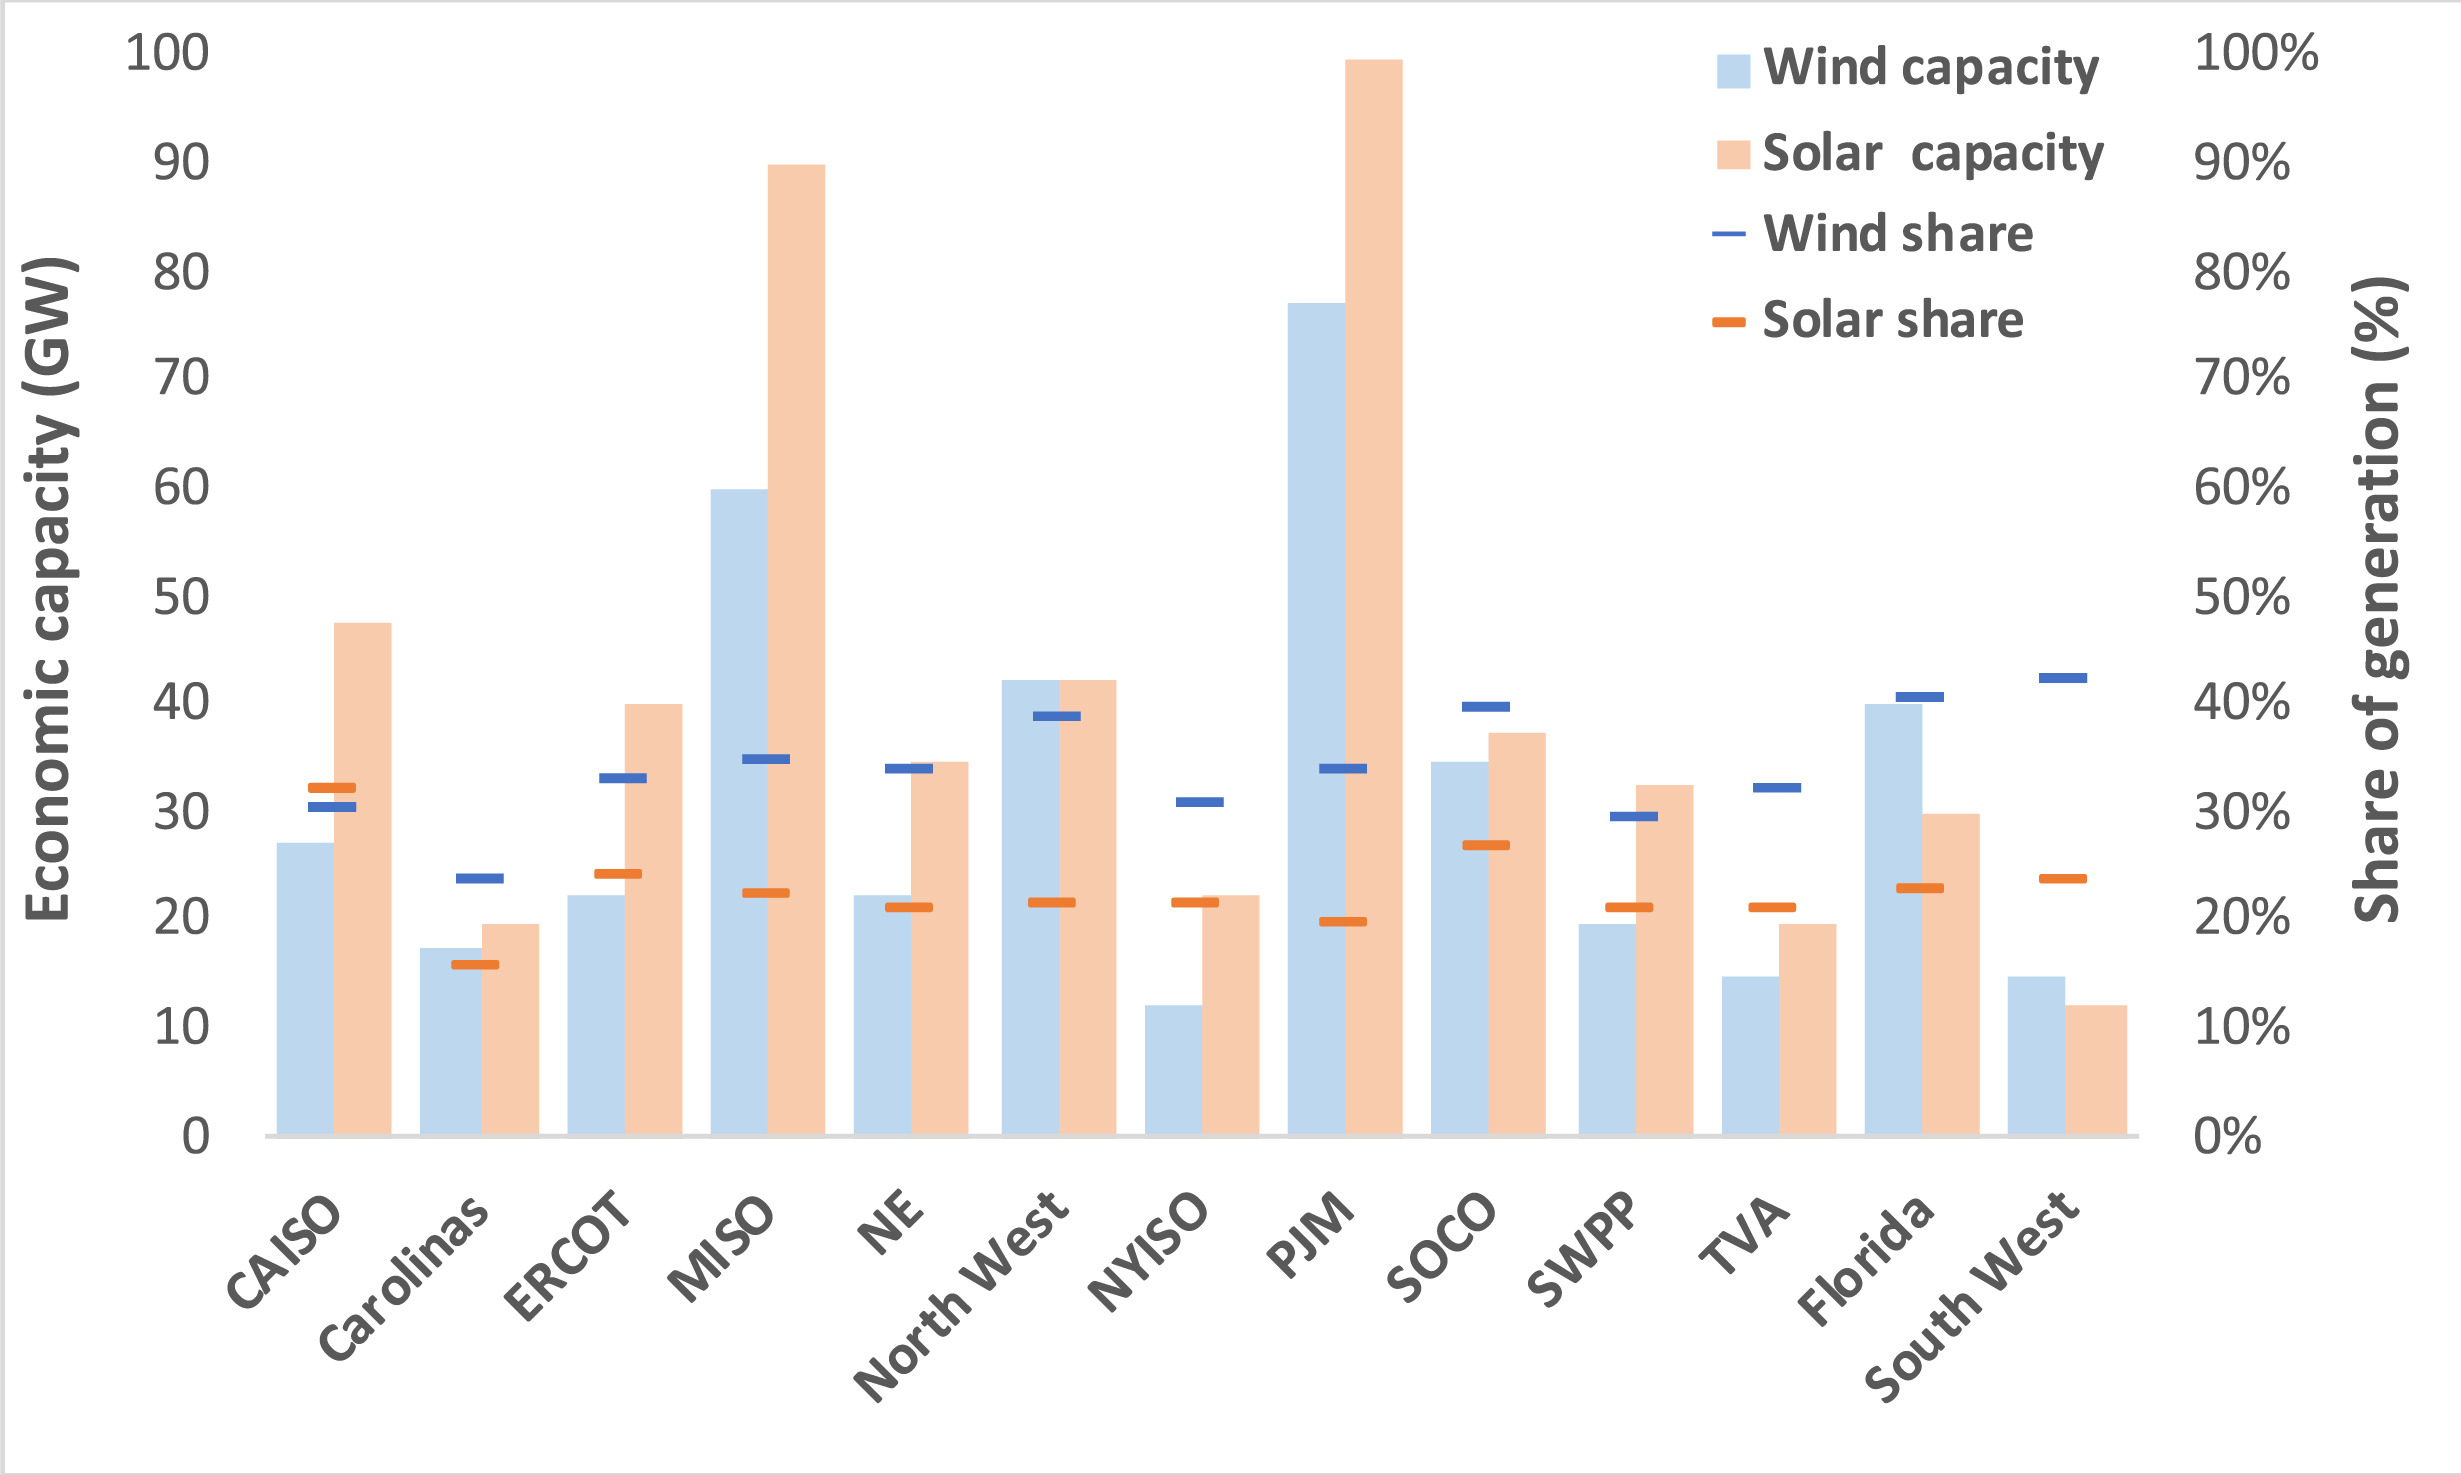 Blog Image: Economic Potential of wind and solar in different regions